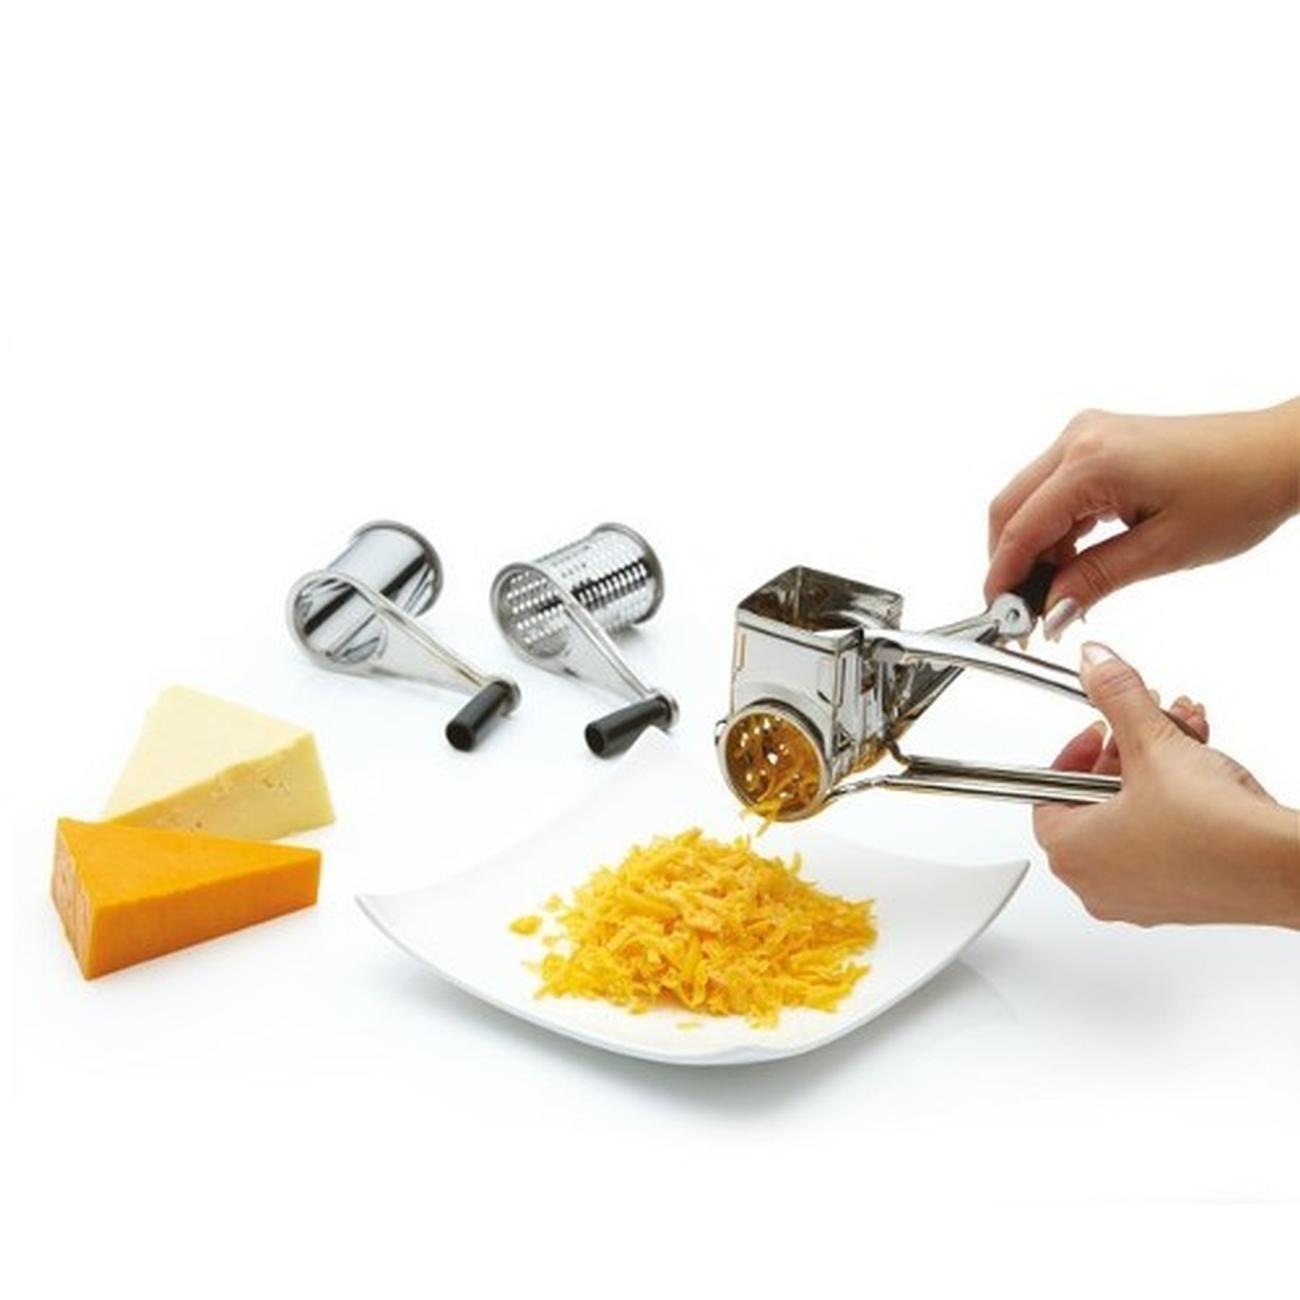 https://www.thekitchenwhisk.ie/contentfiles/productImages/Large/KitchenCraft-Stainless-Steel-Rotary-Cheese-Grater-3-Blades-cheddar.jpg